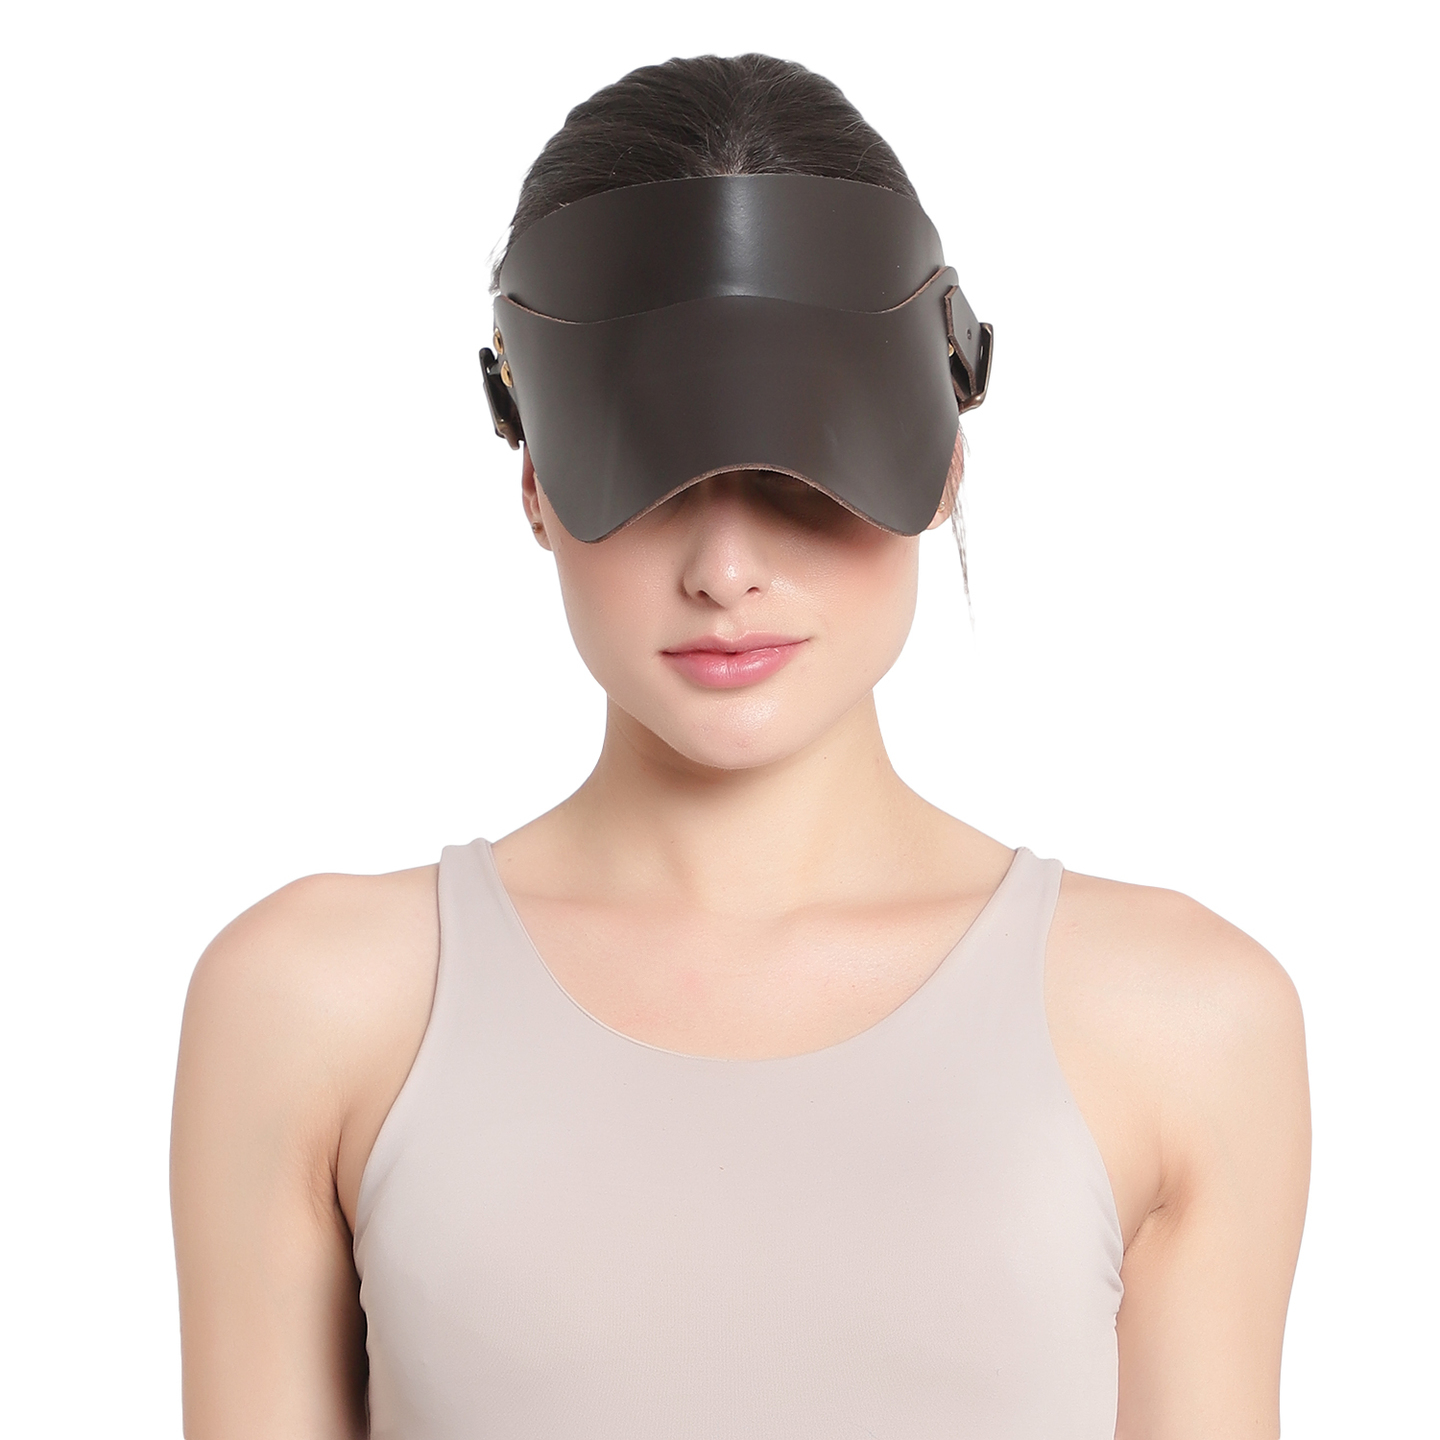 Panashe Isola Leather Visor Cap  Brown for sports like shooting, archery, golf, tennis,outdoors, travelling etc ideal for eyes and face protection with shade from harsh sunlight and bright lights.